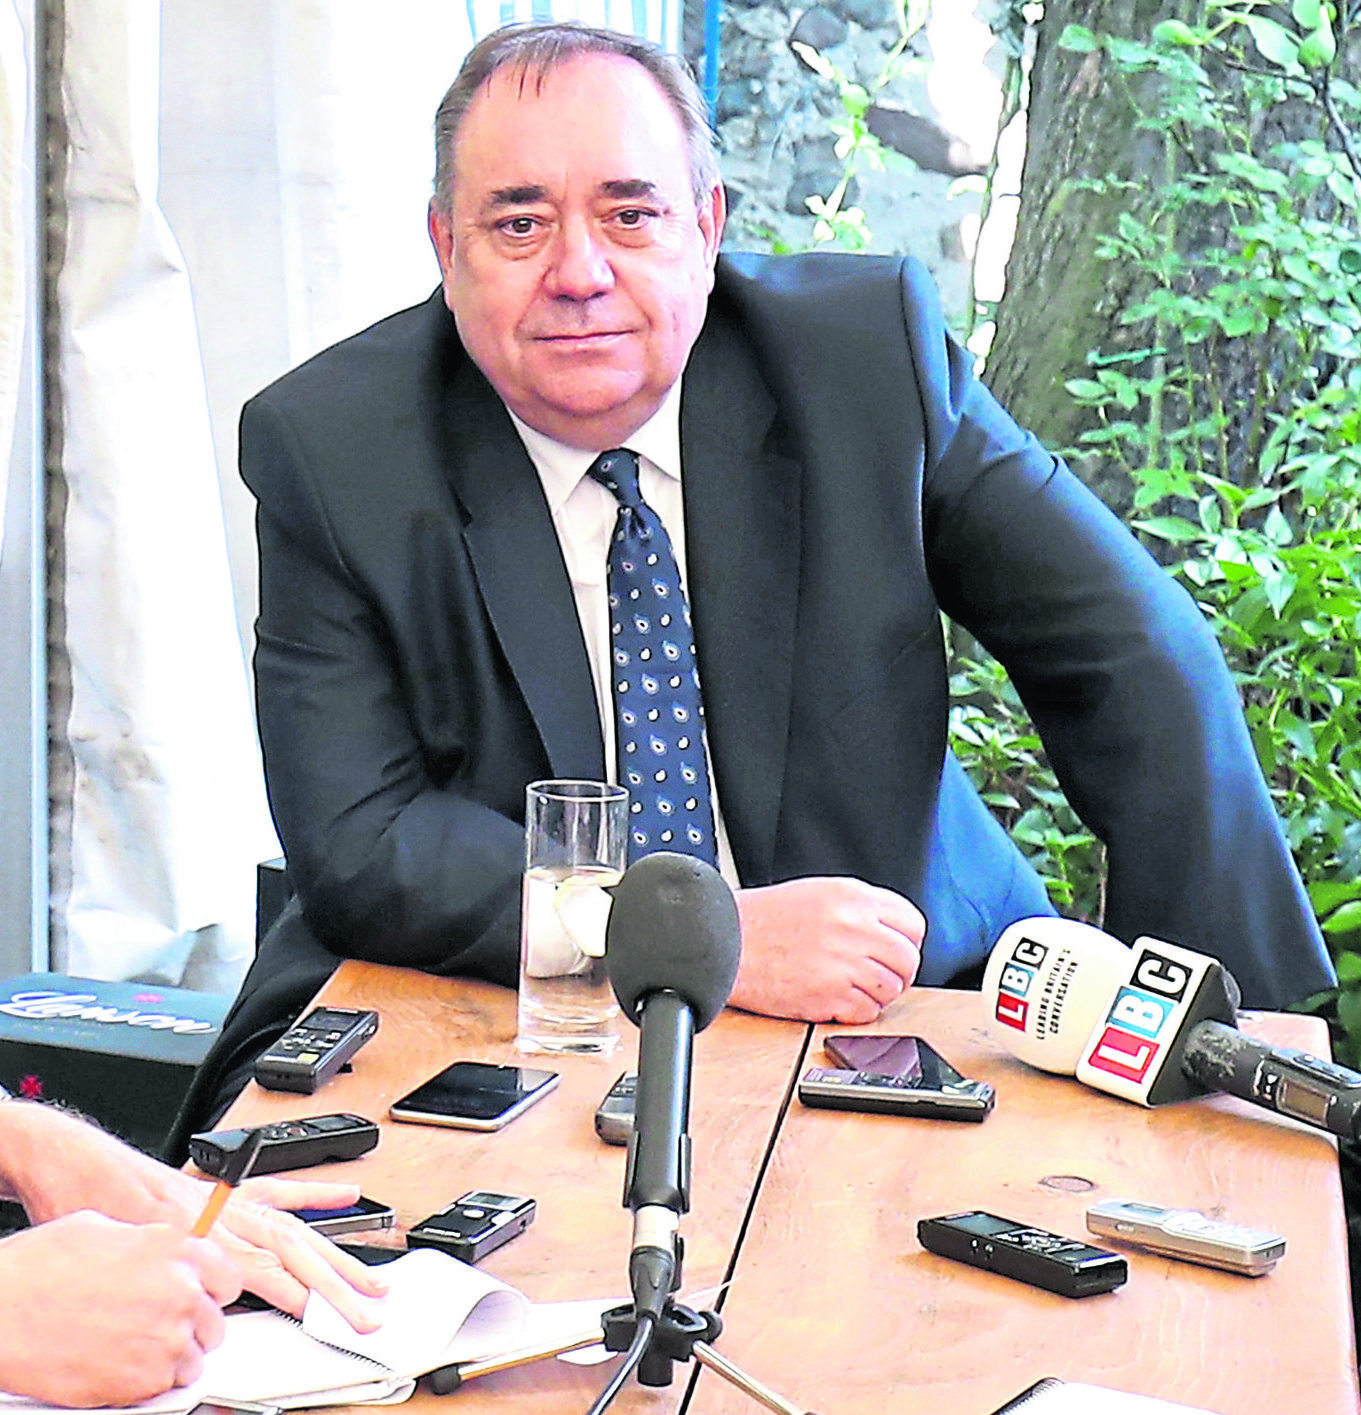 The former first minister of Scotland Alex Salmond speaking to the media at the Champany Inn in Linlithgow, West Lothian, after he launched a legal action to contest the complaints process that was activated against him following allegations about his conduct towards two staff members in 2013 - while he was in office.